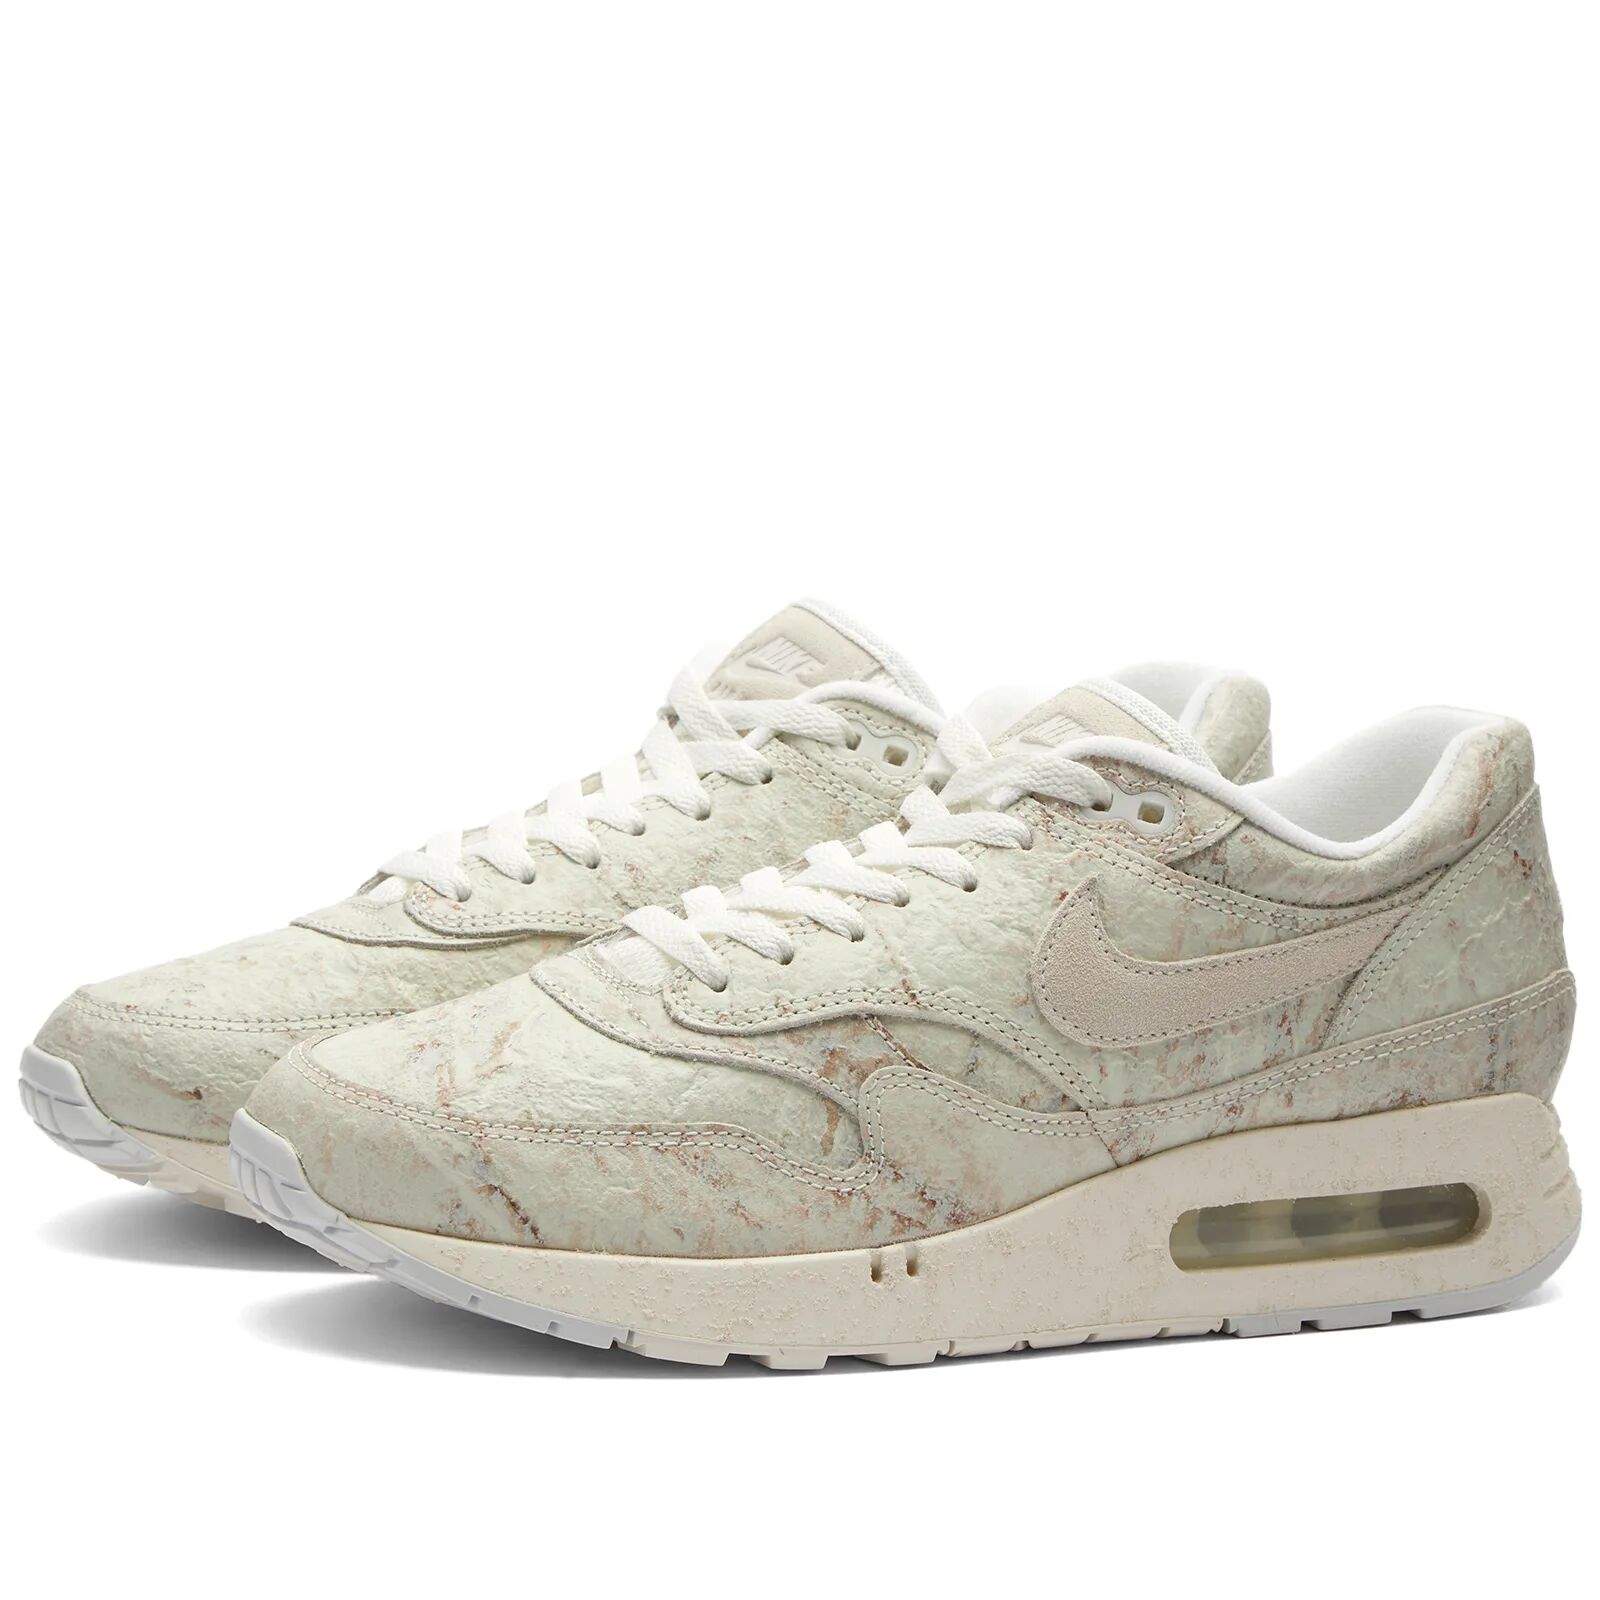 Nike Air Max 1 '86 OG Sneakers in Summit White/Photon Dust/Black, Size UK 10.5